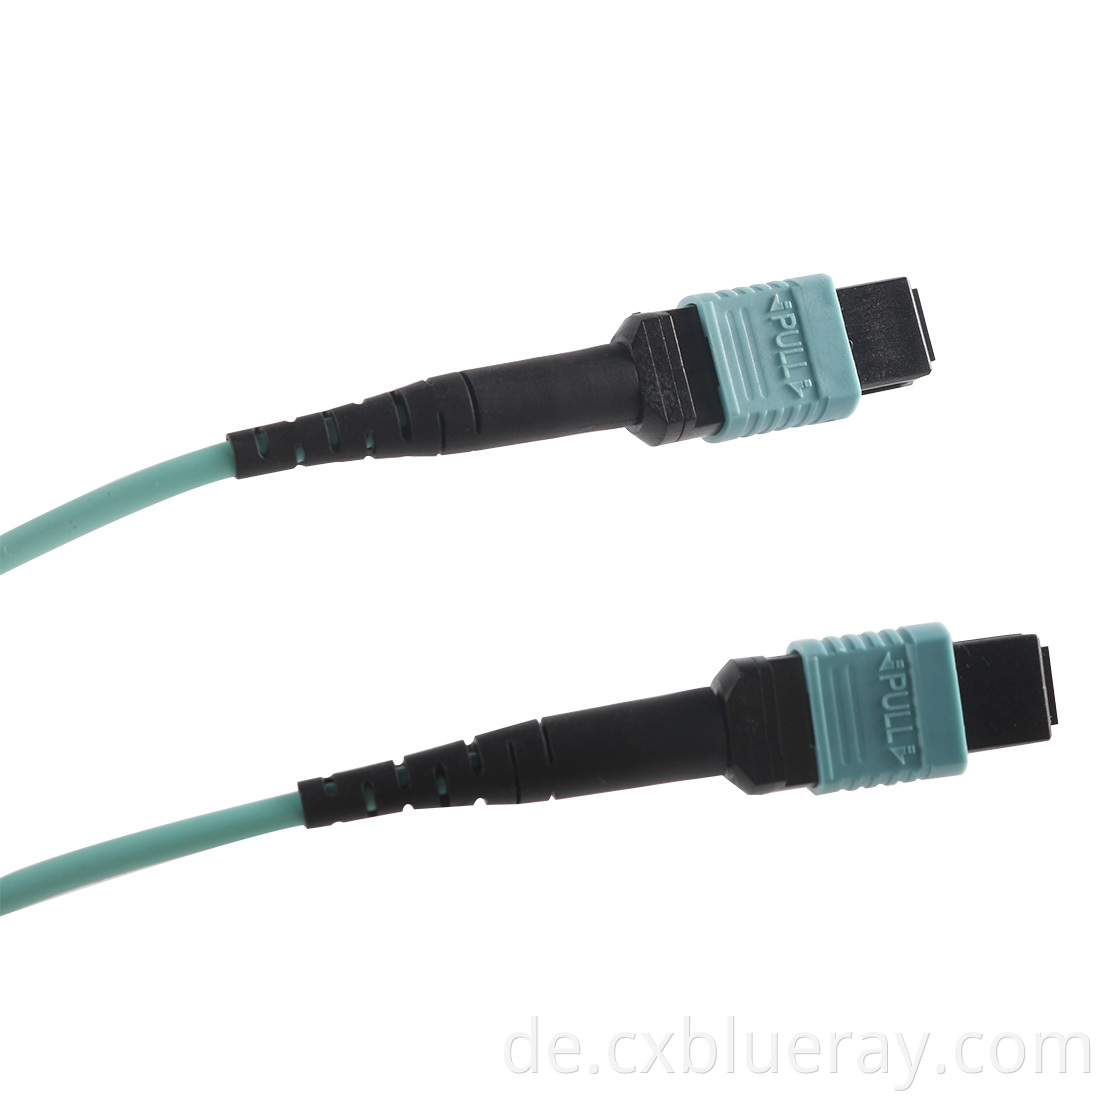 Mpo Connector Patch Cord Jumper